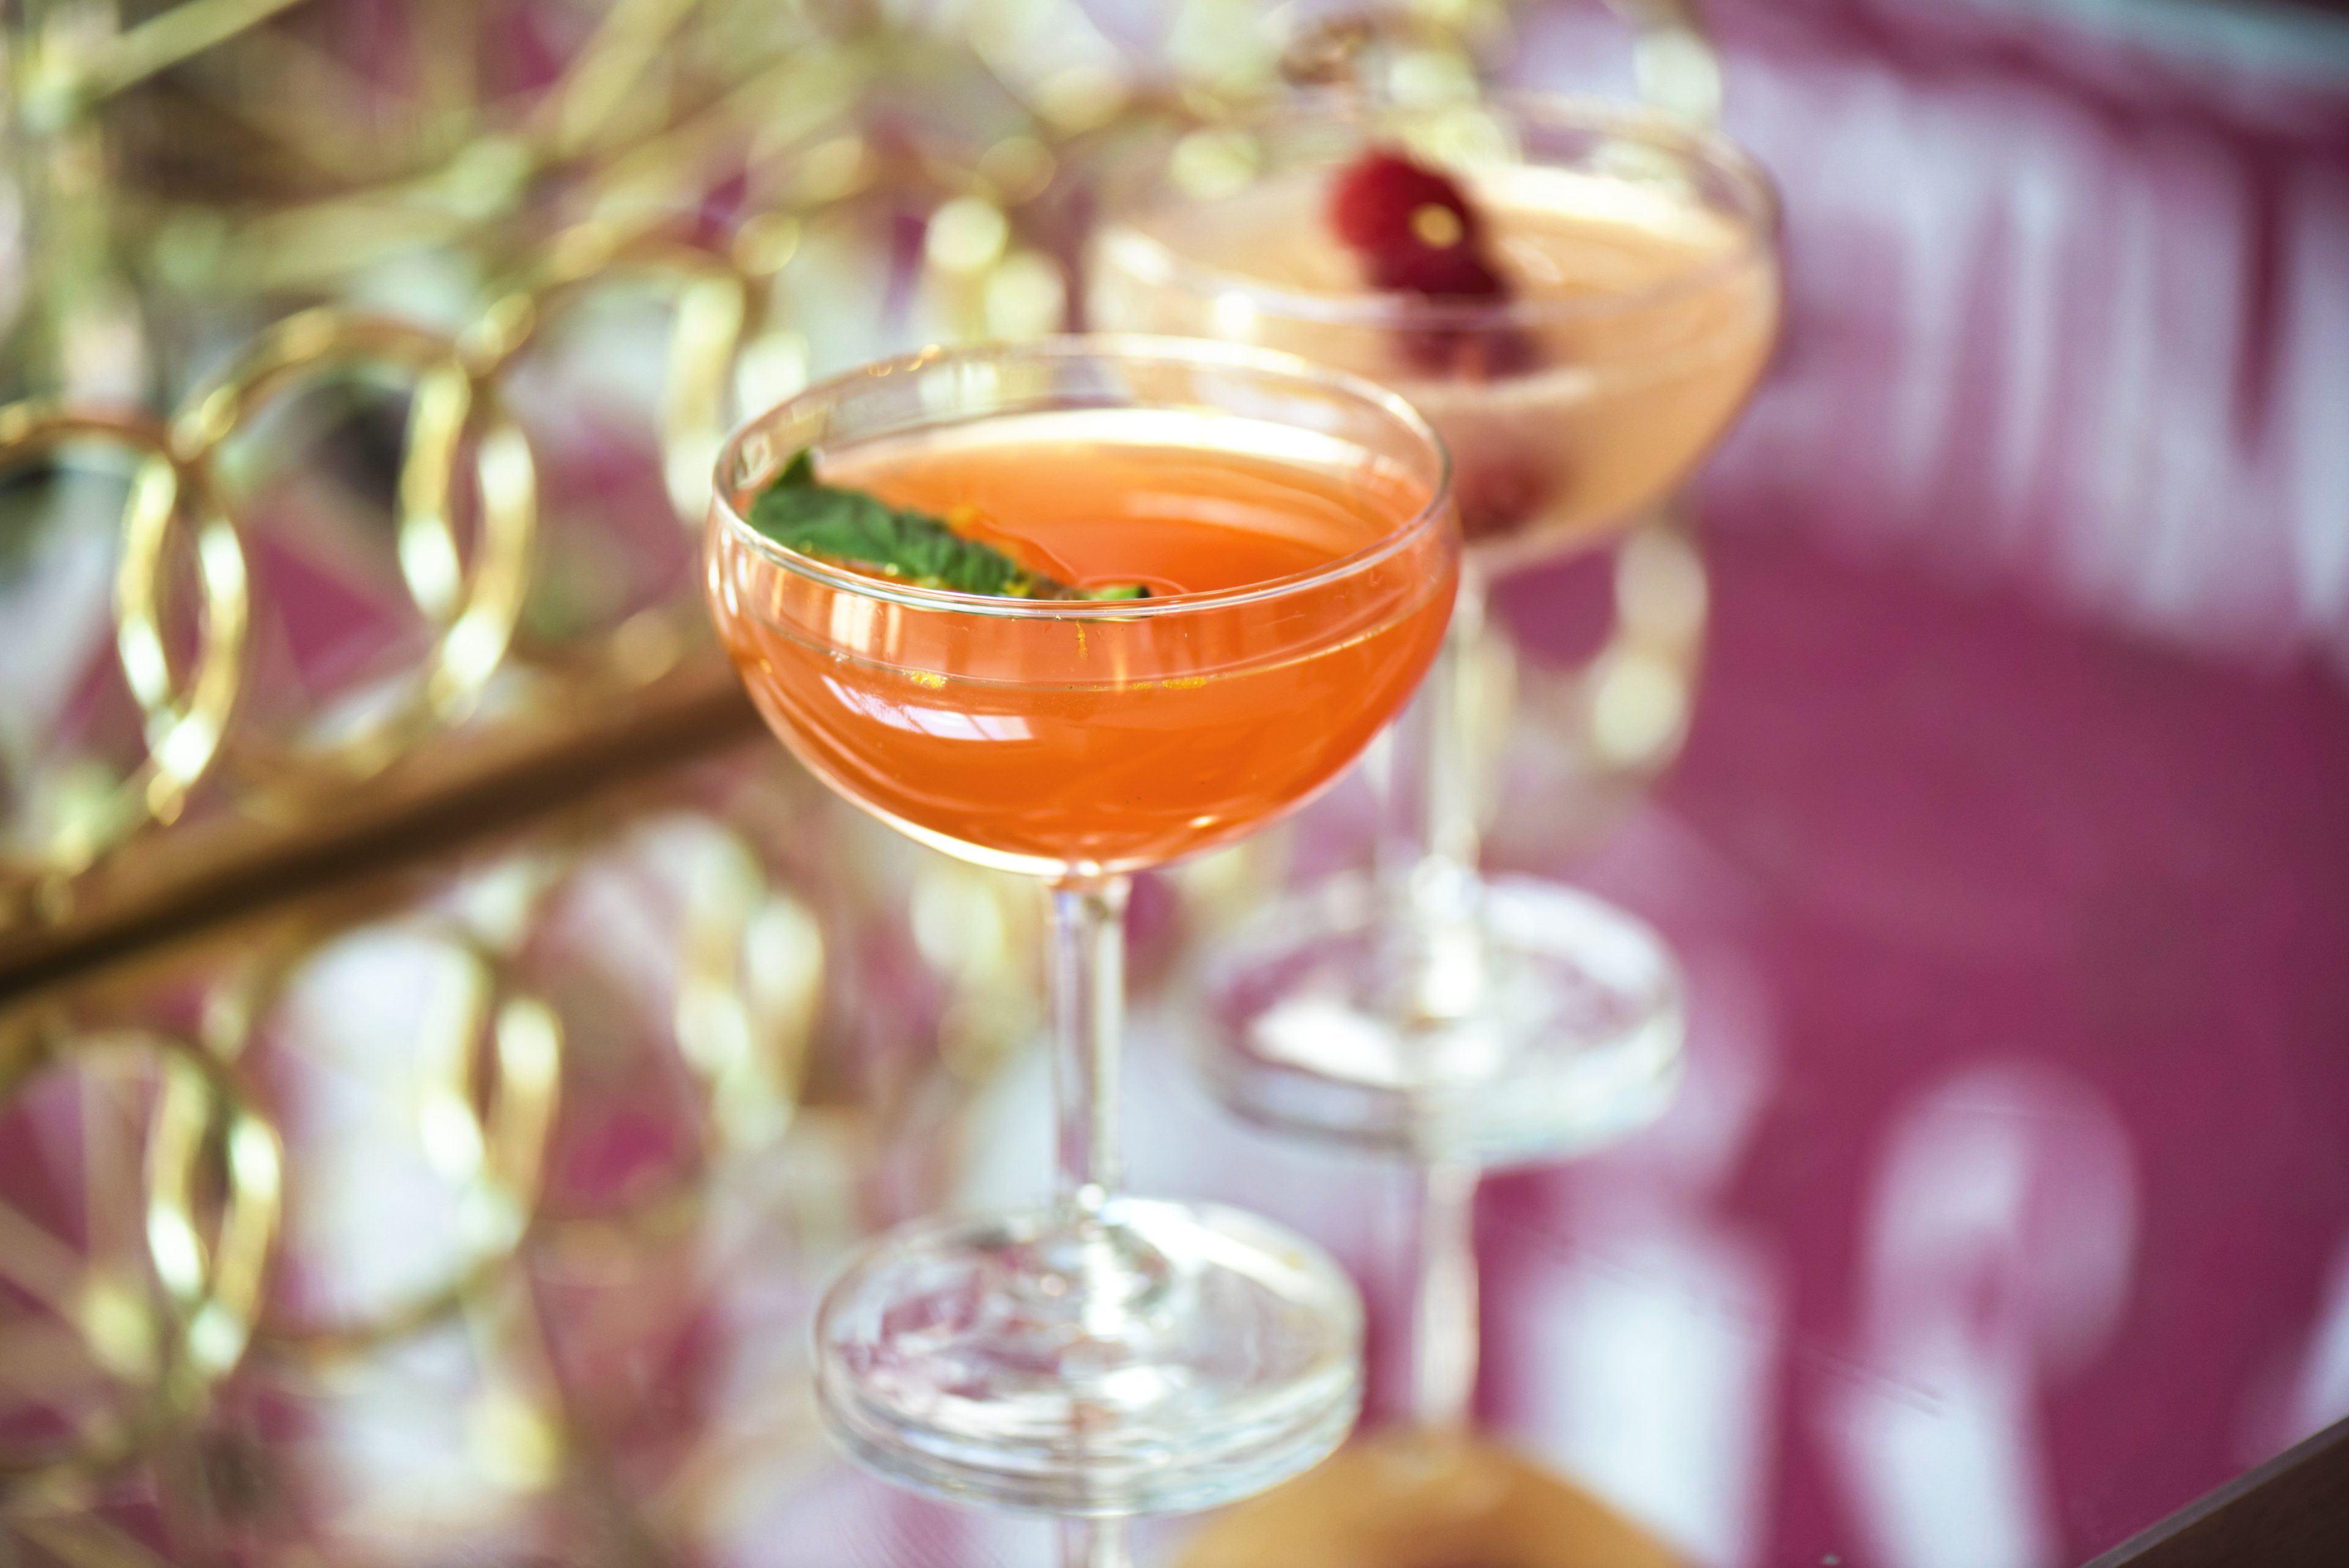 Orange and gold cocktails in coupe glasses